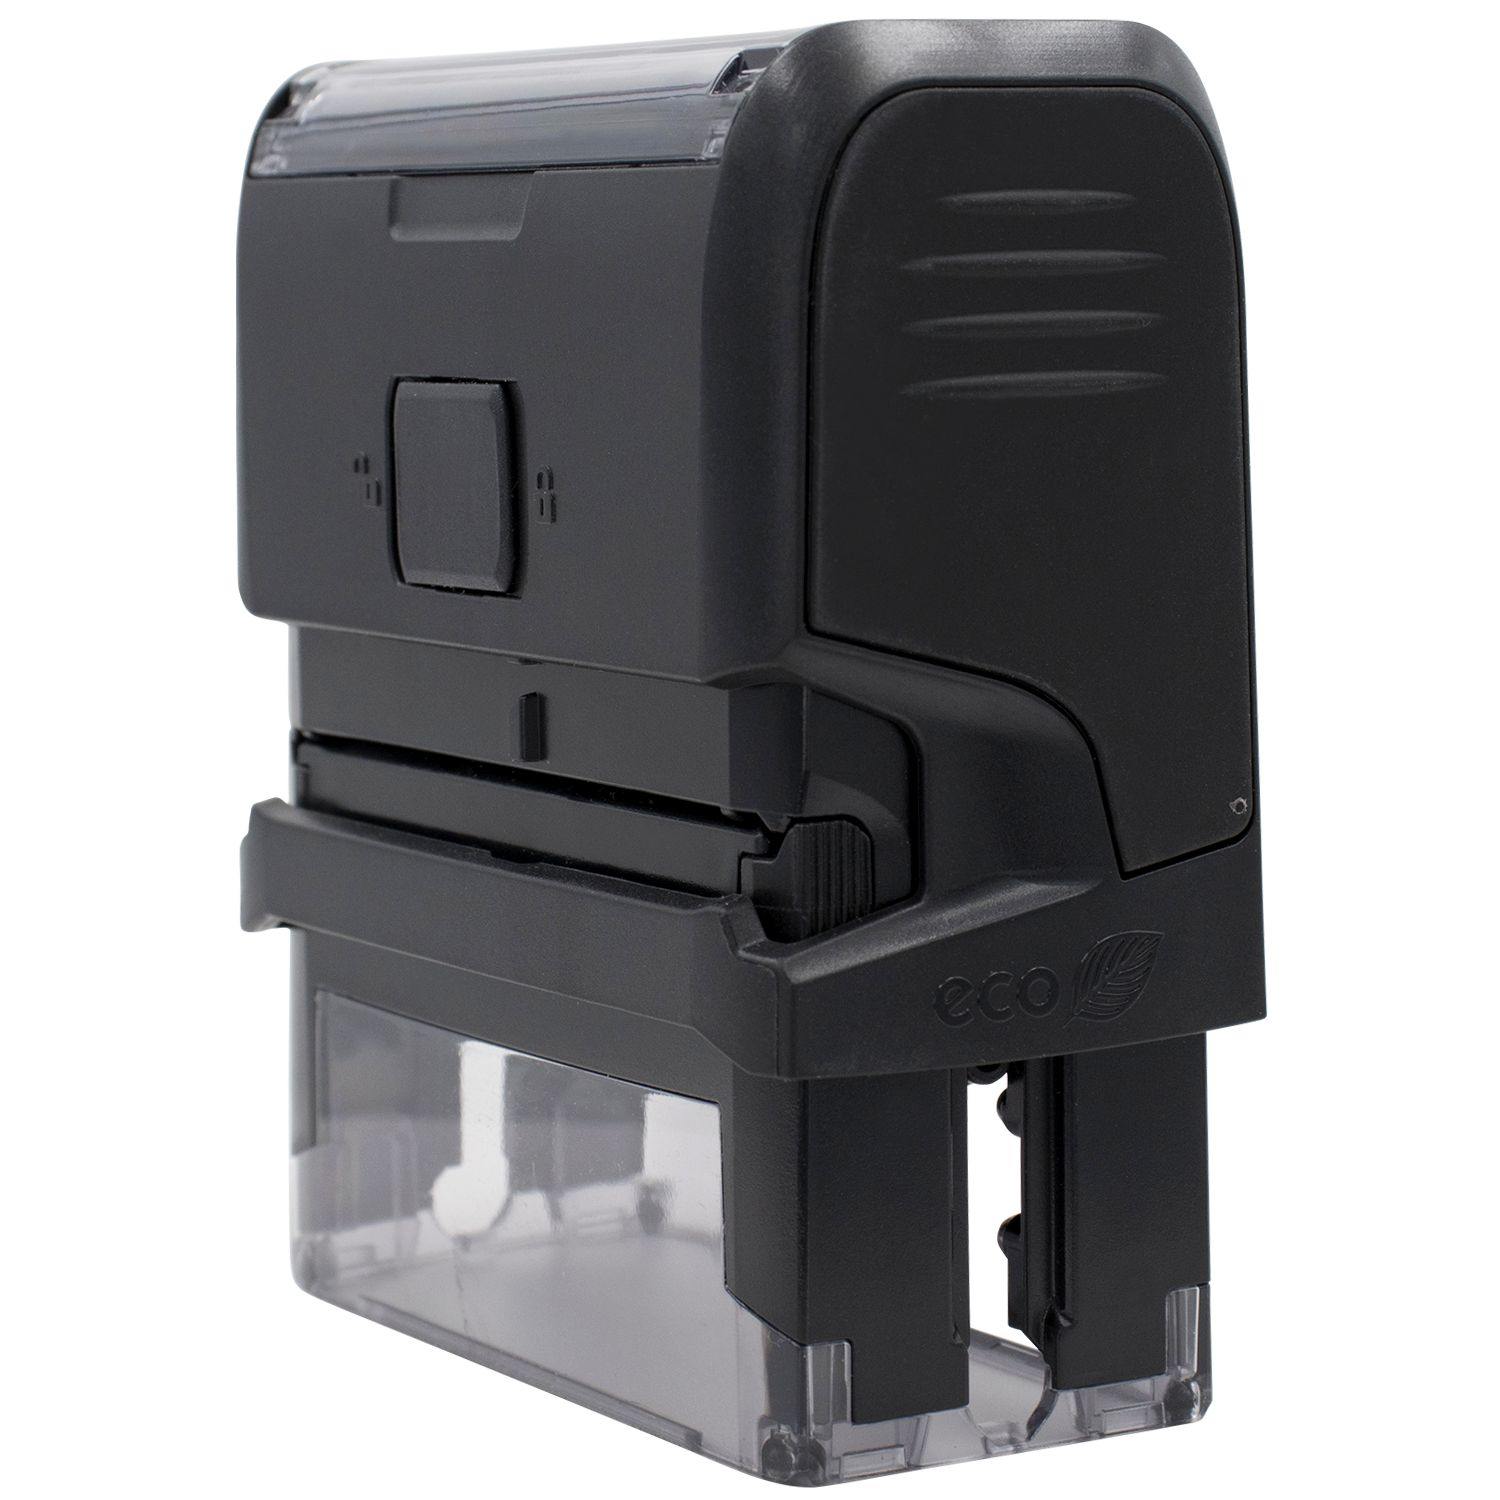 Large Self Inking Return Receipt Requested Stamp - Engineer Seal Stamps - Brand_Trodat, Impression Size_Large, Stamp Type_Self-Inking Stamp, Type of Use_Business